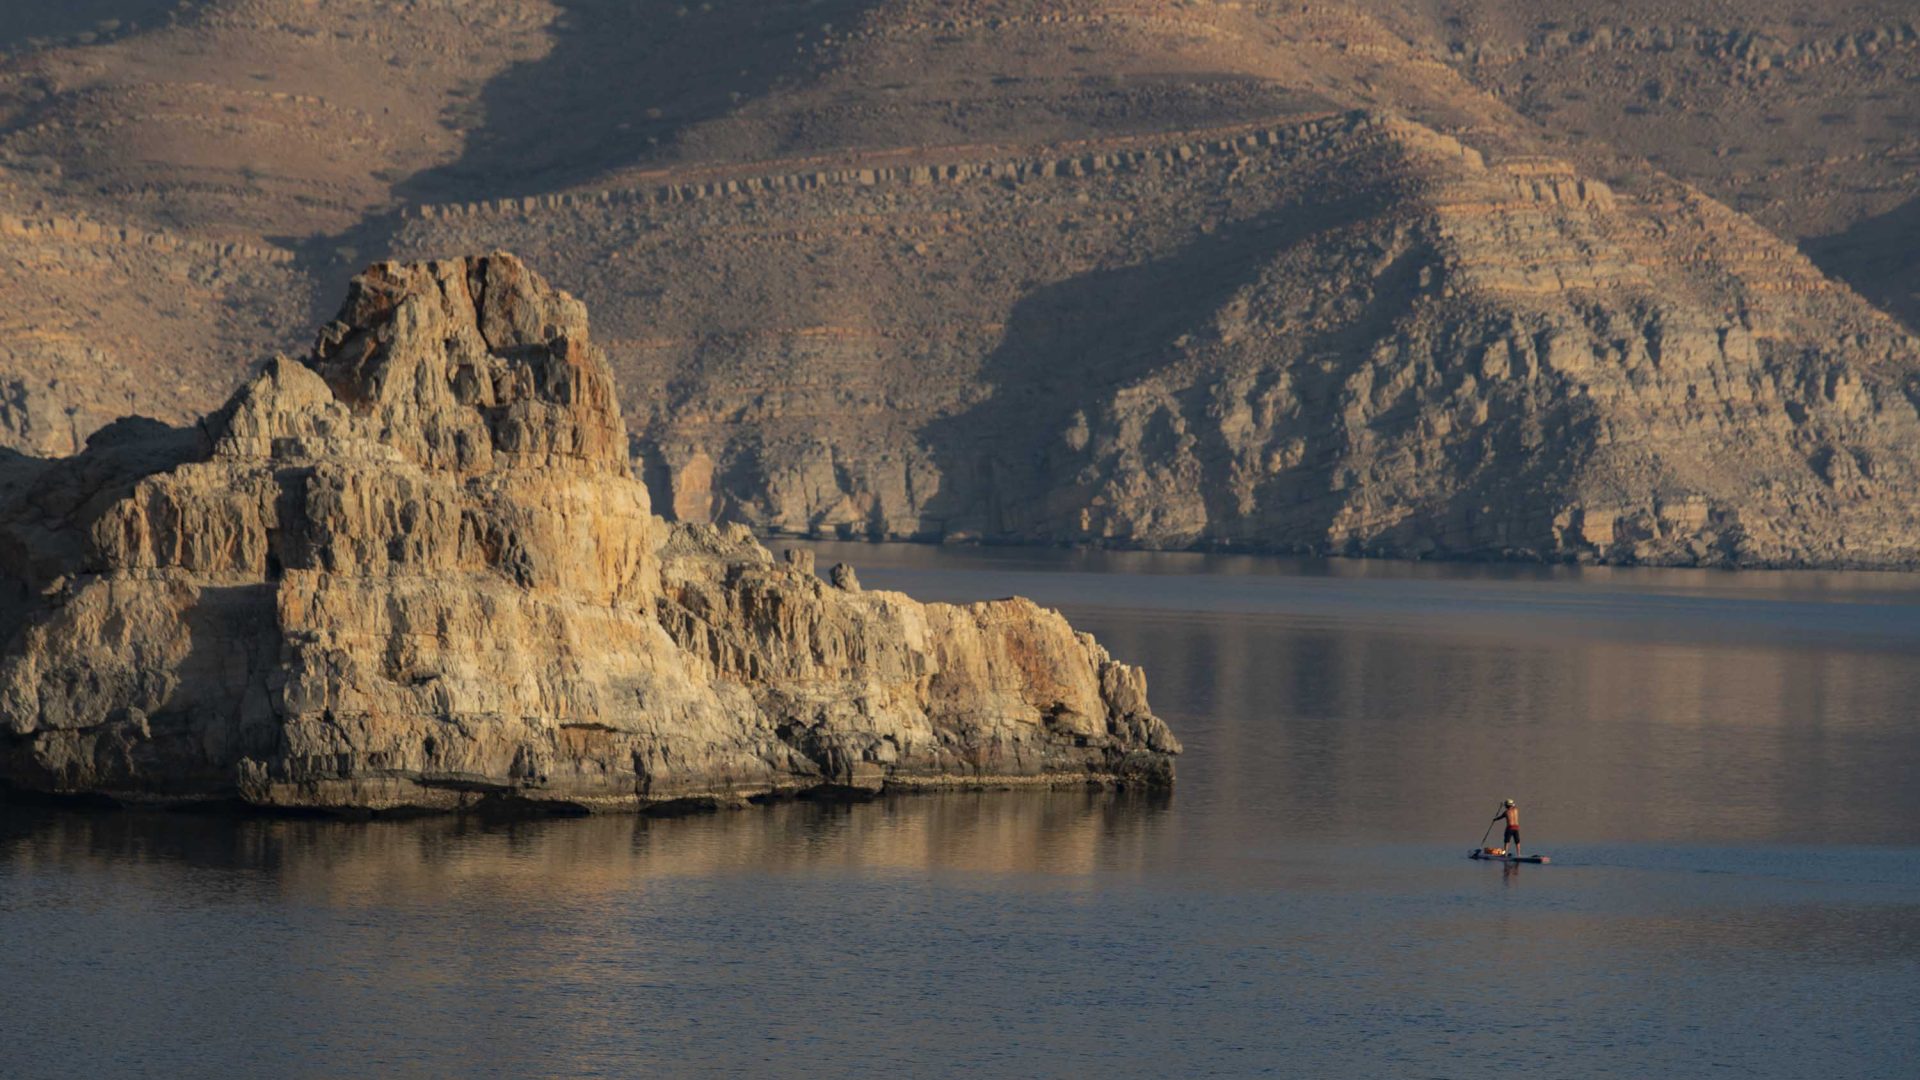 A lone person on a paddle board surrounded by desert fjords.